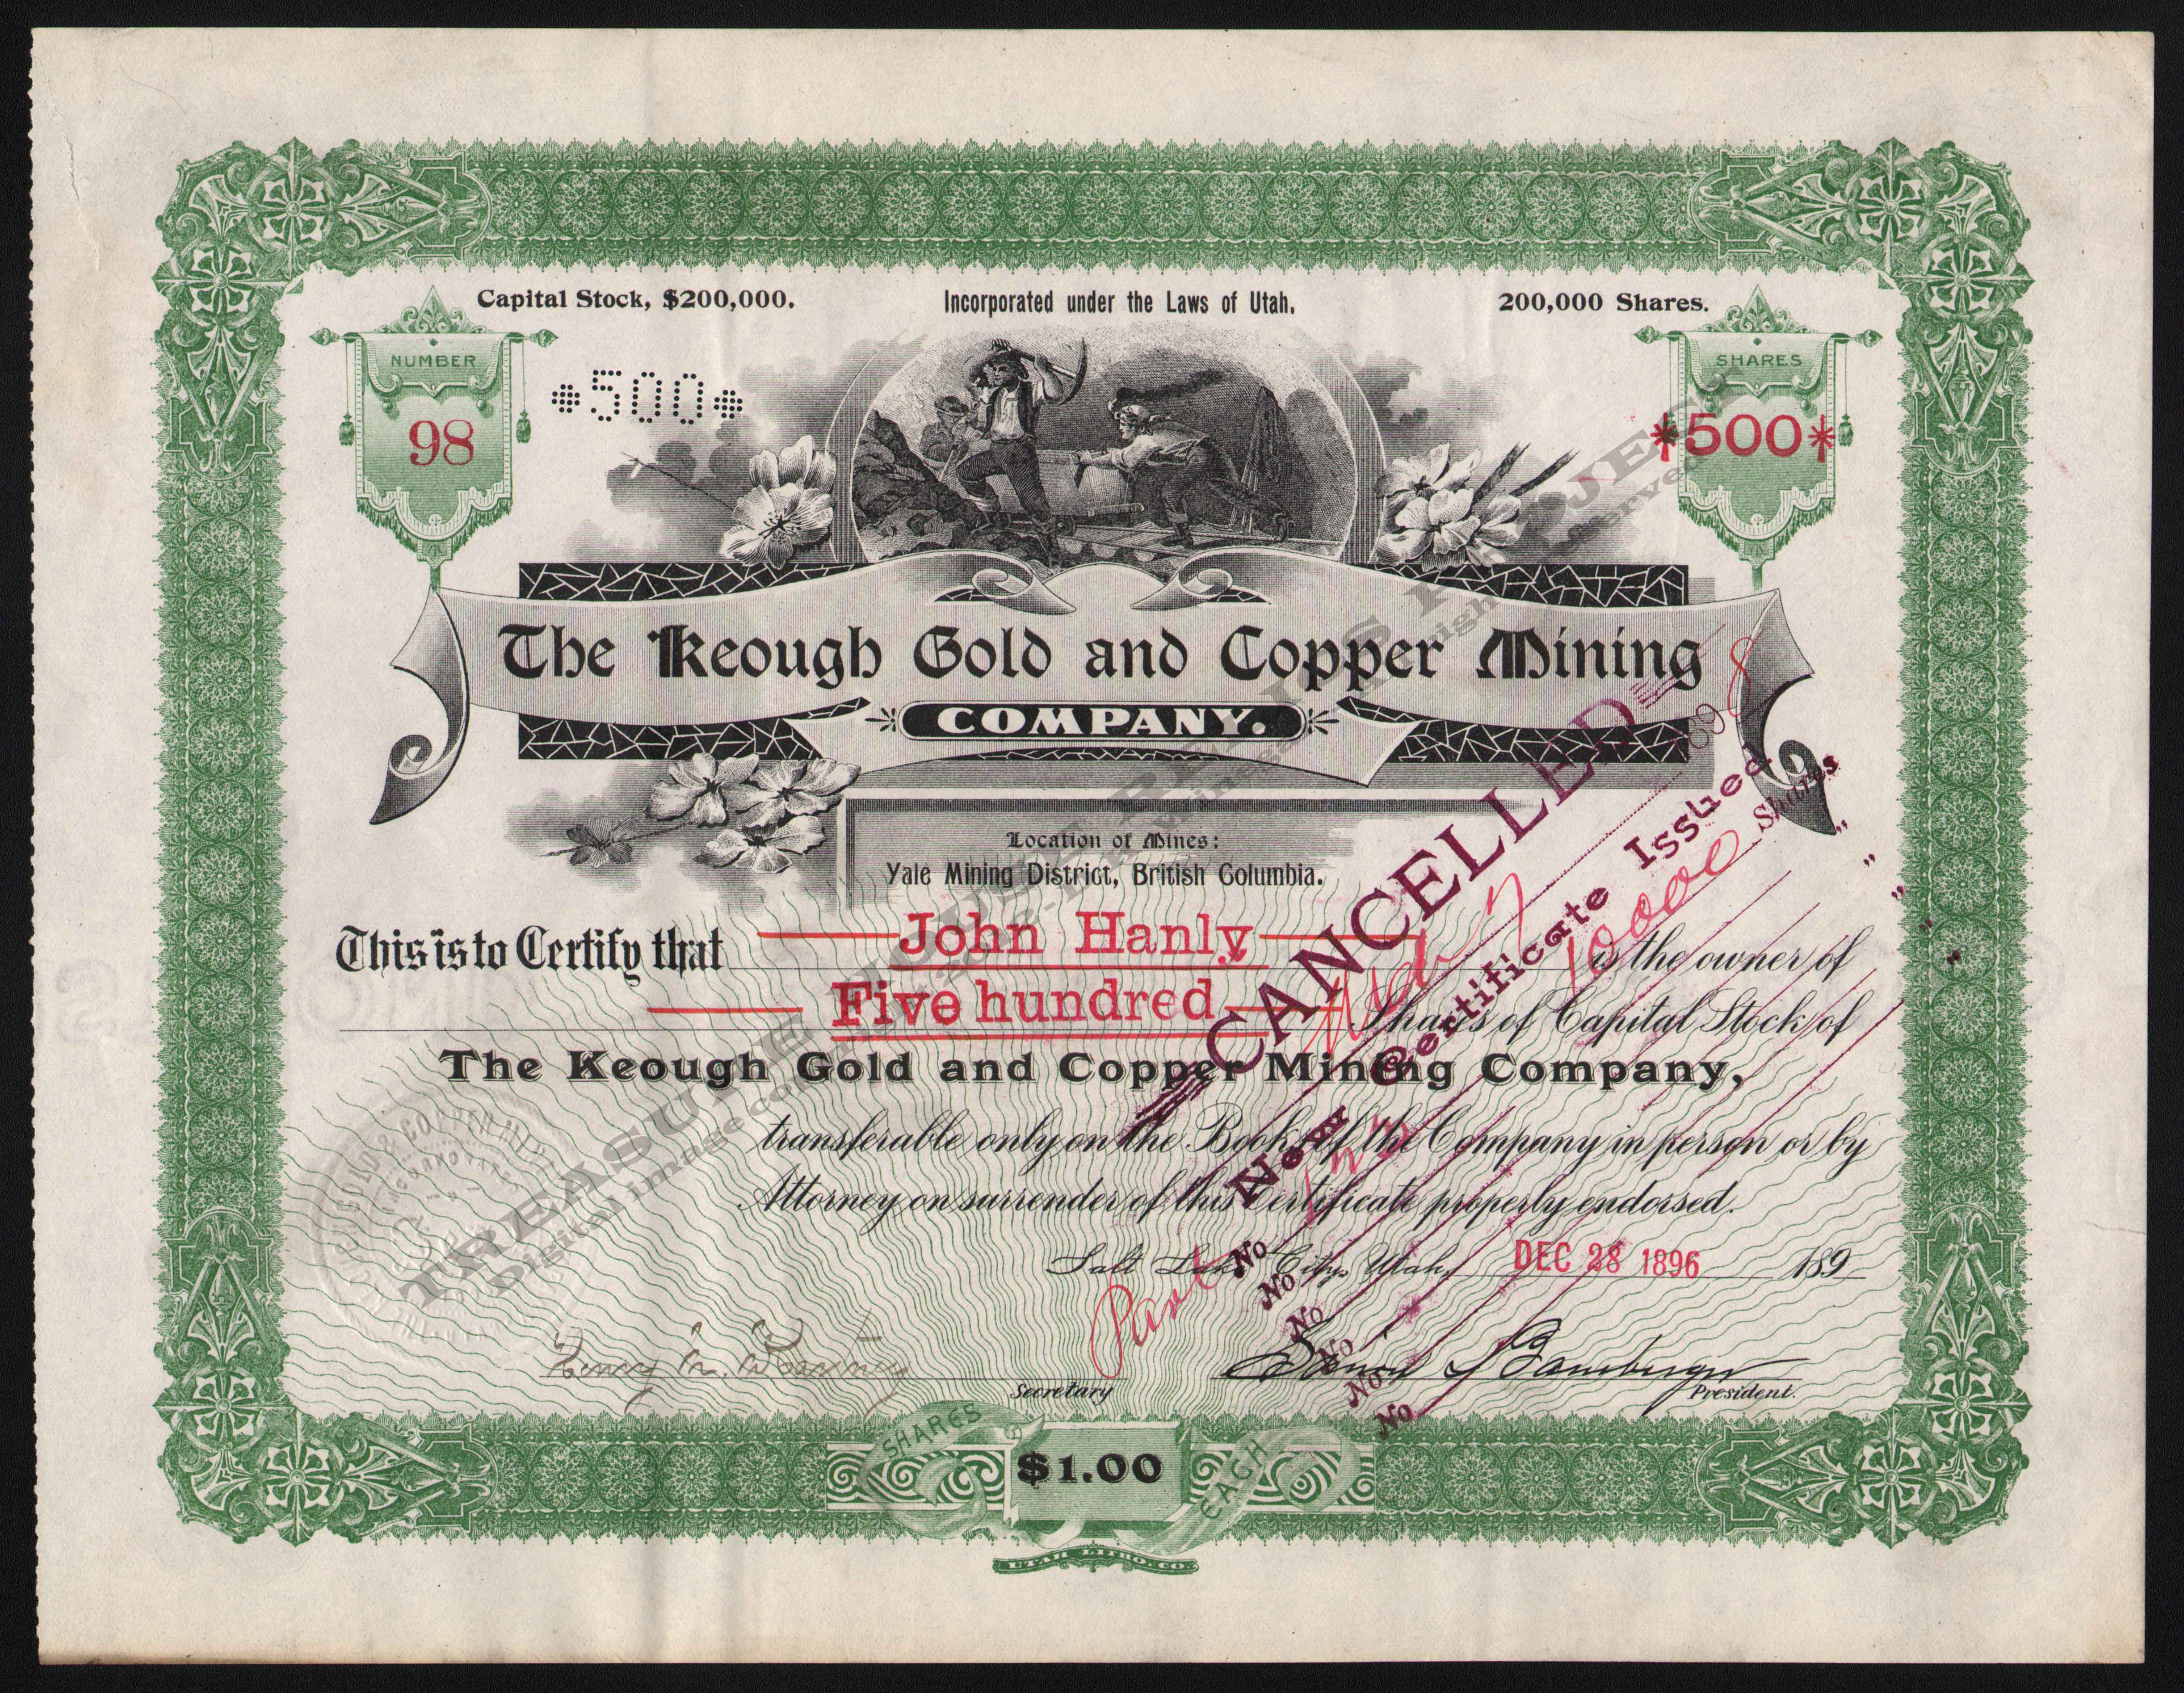 LETTERHEAD/KEOUGH_GOLD_AND_COPPER_MINING_COMPANY_98_1896_KIRK_400_CROP_EMBOSS.jpg